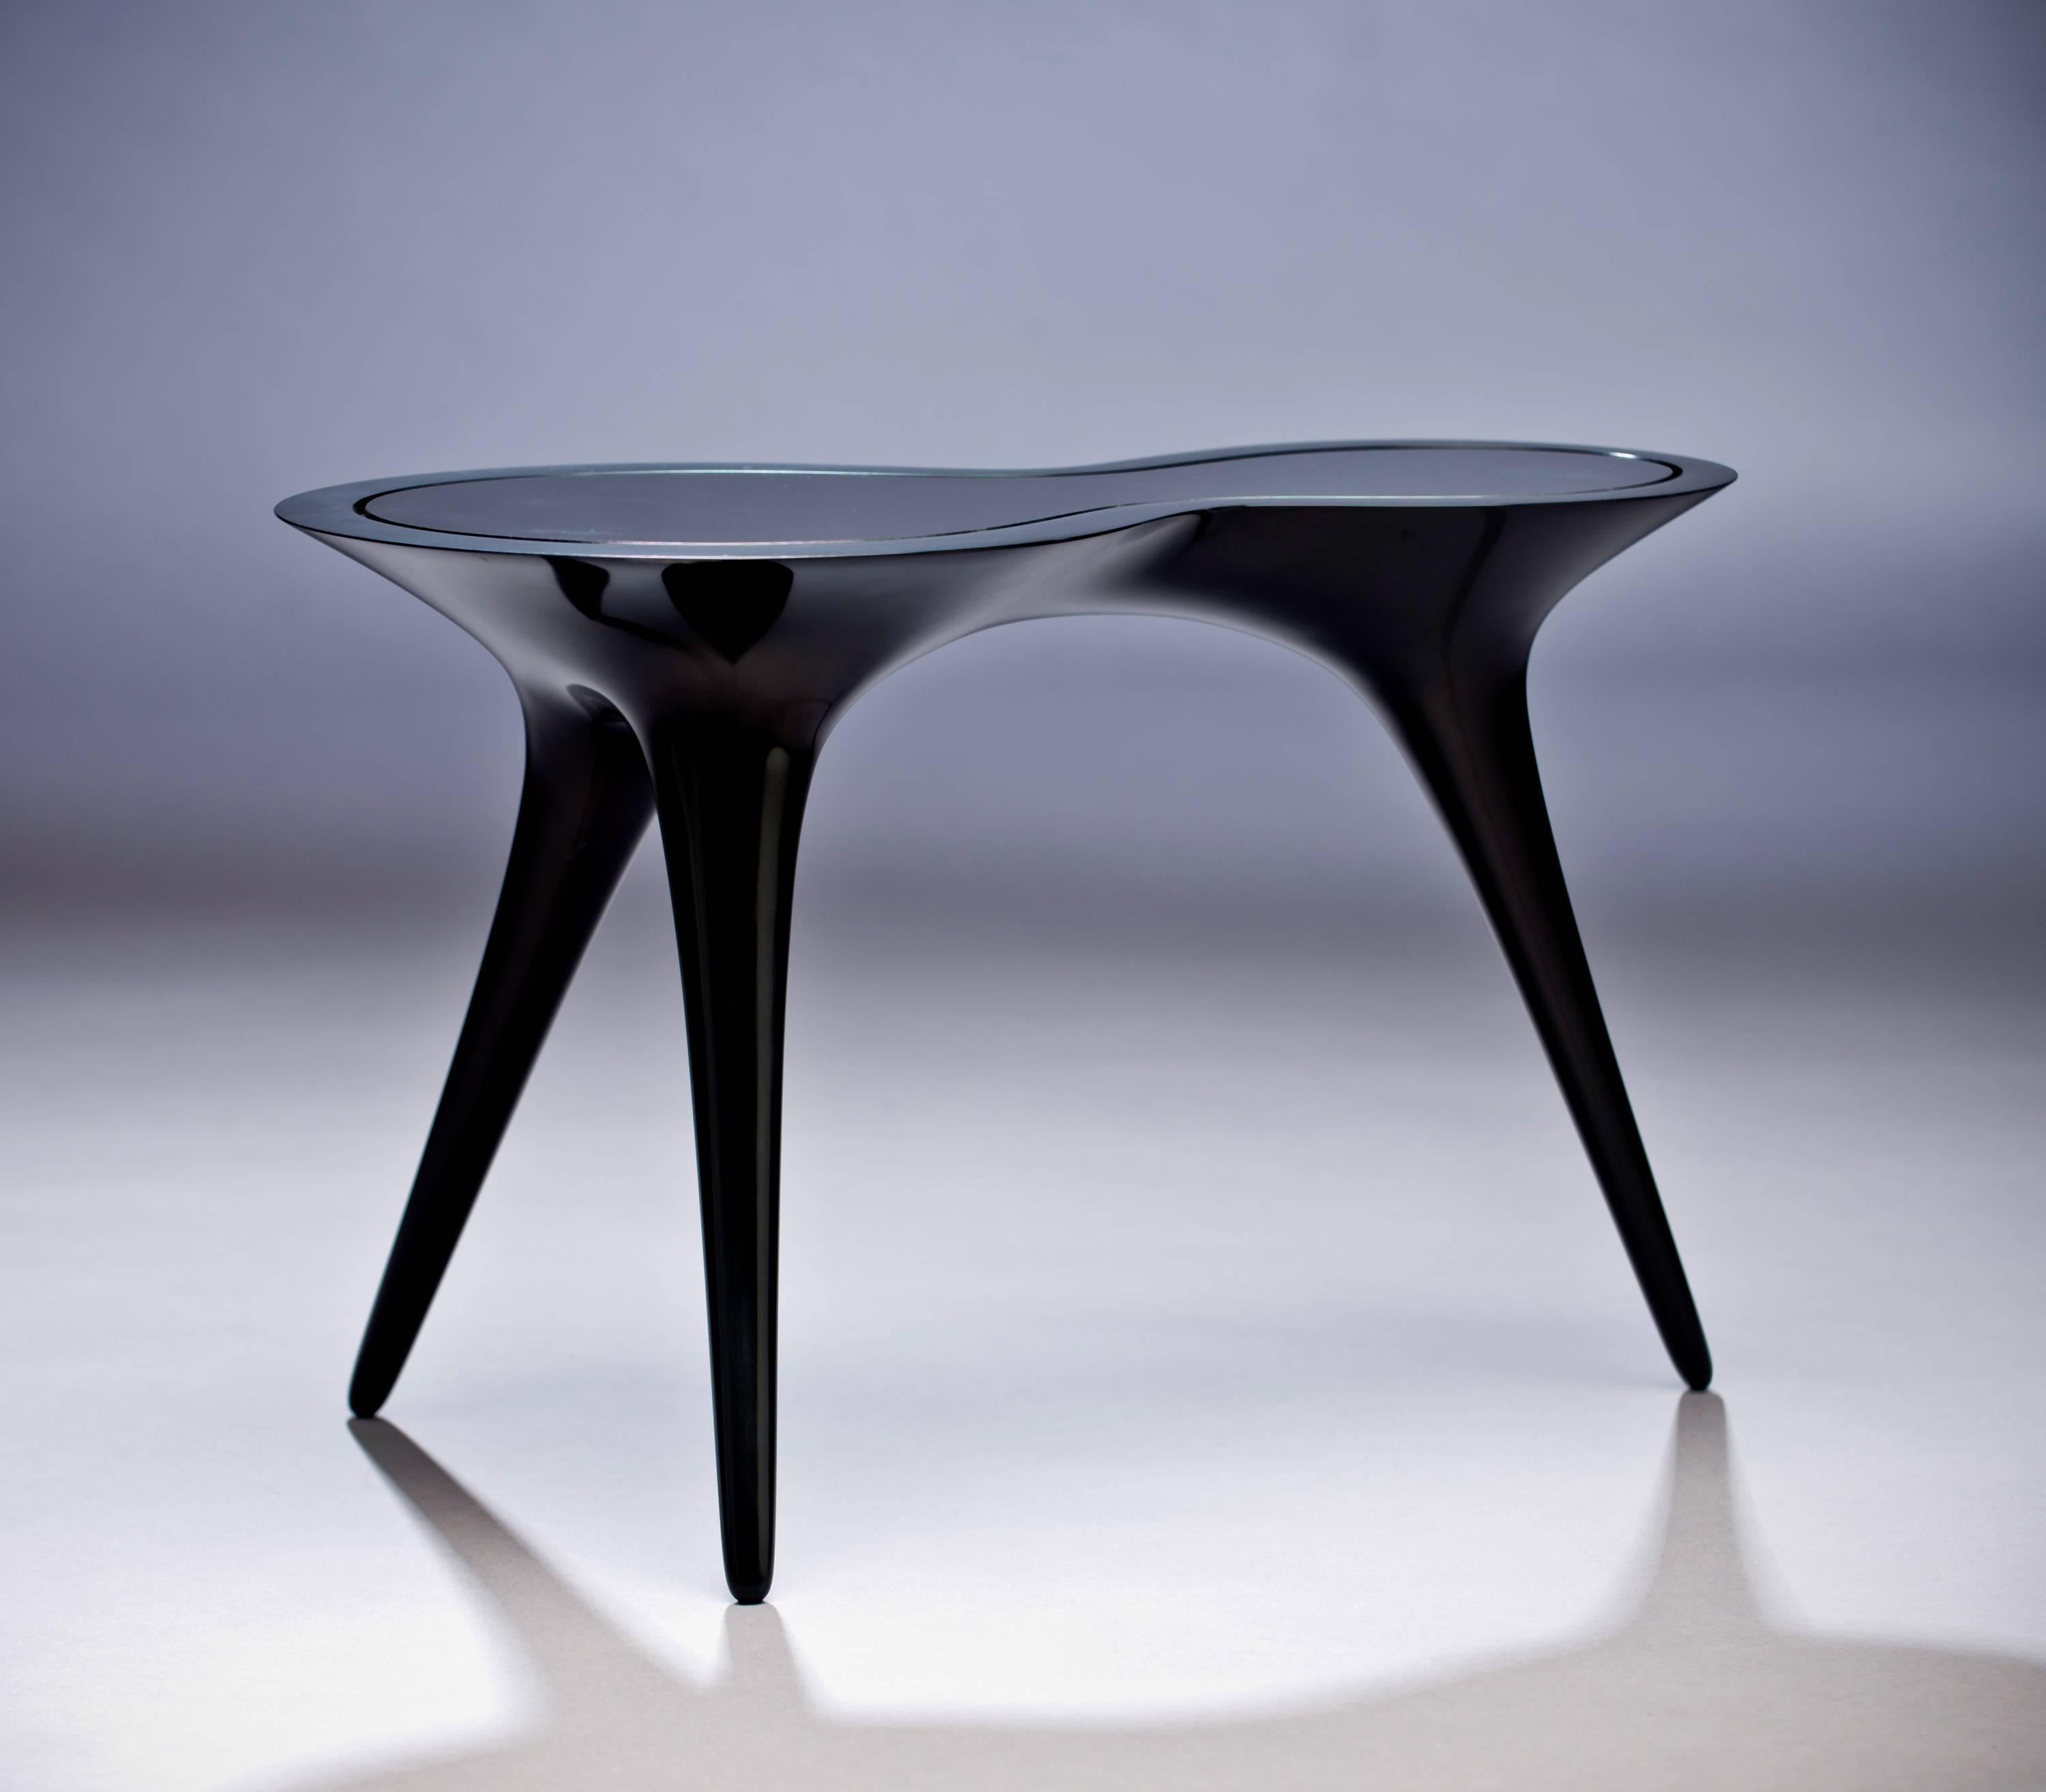 This exquisite set of side tables were created using corian and glass by German artist and designer Timothy Schreiber.

Timothy Schreiber initially trained in cabinet making in Germany before studying architecture and design in Germany and England,